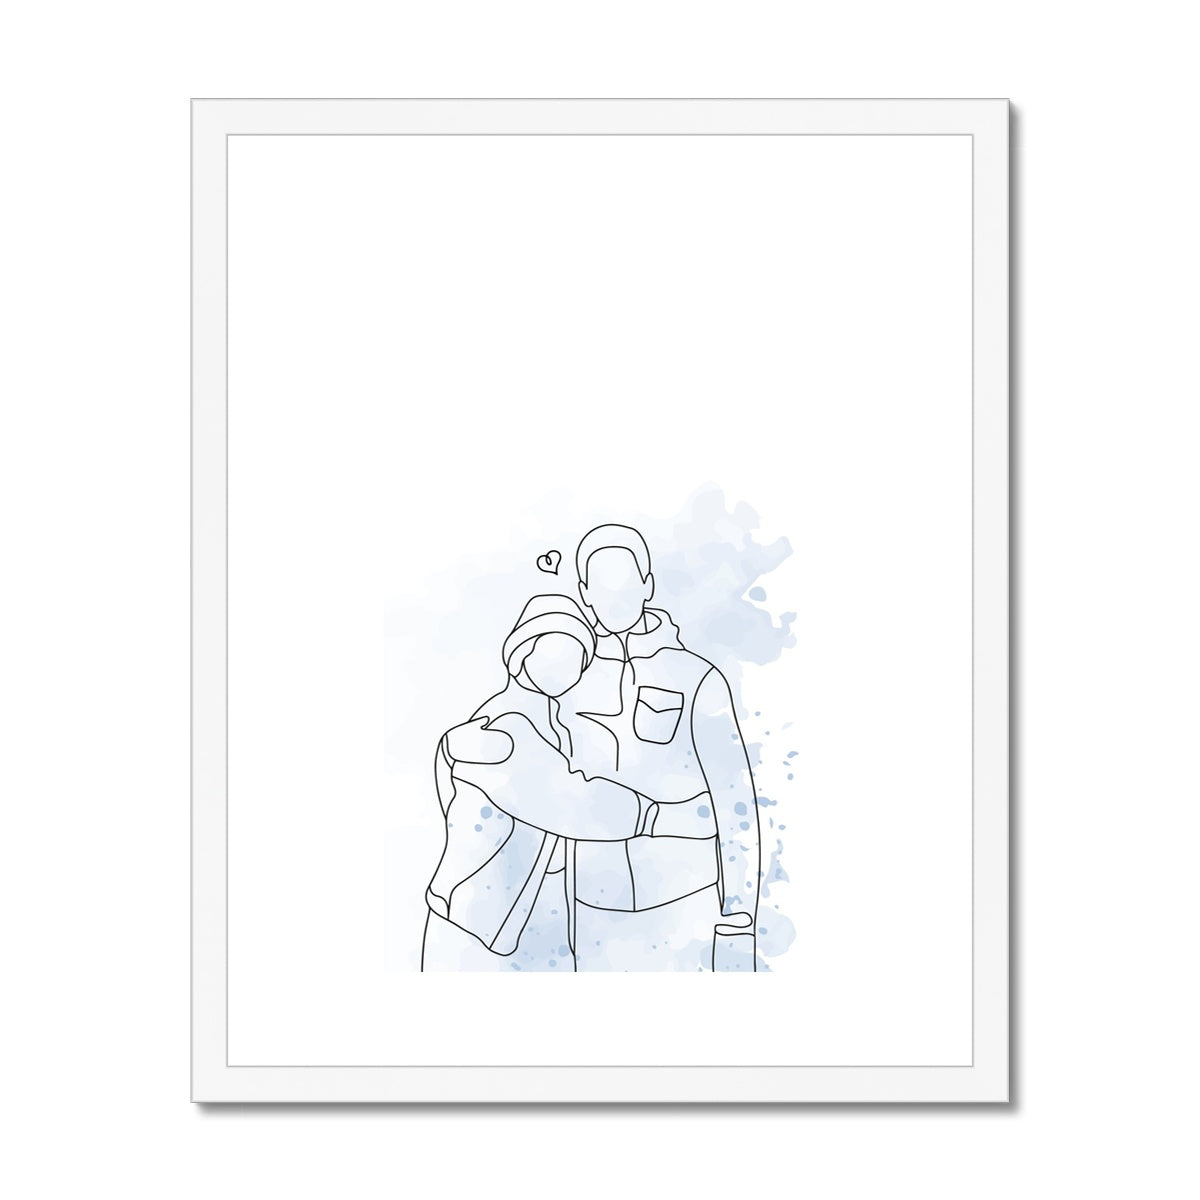 Lovers Line Drawing Framed & Mounted Print